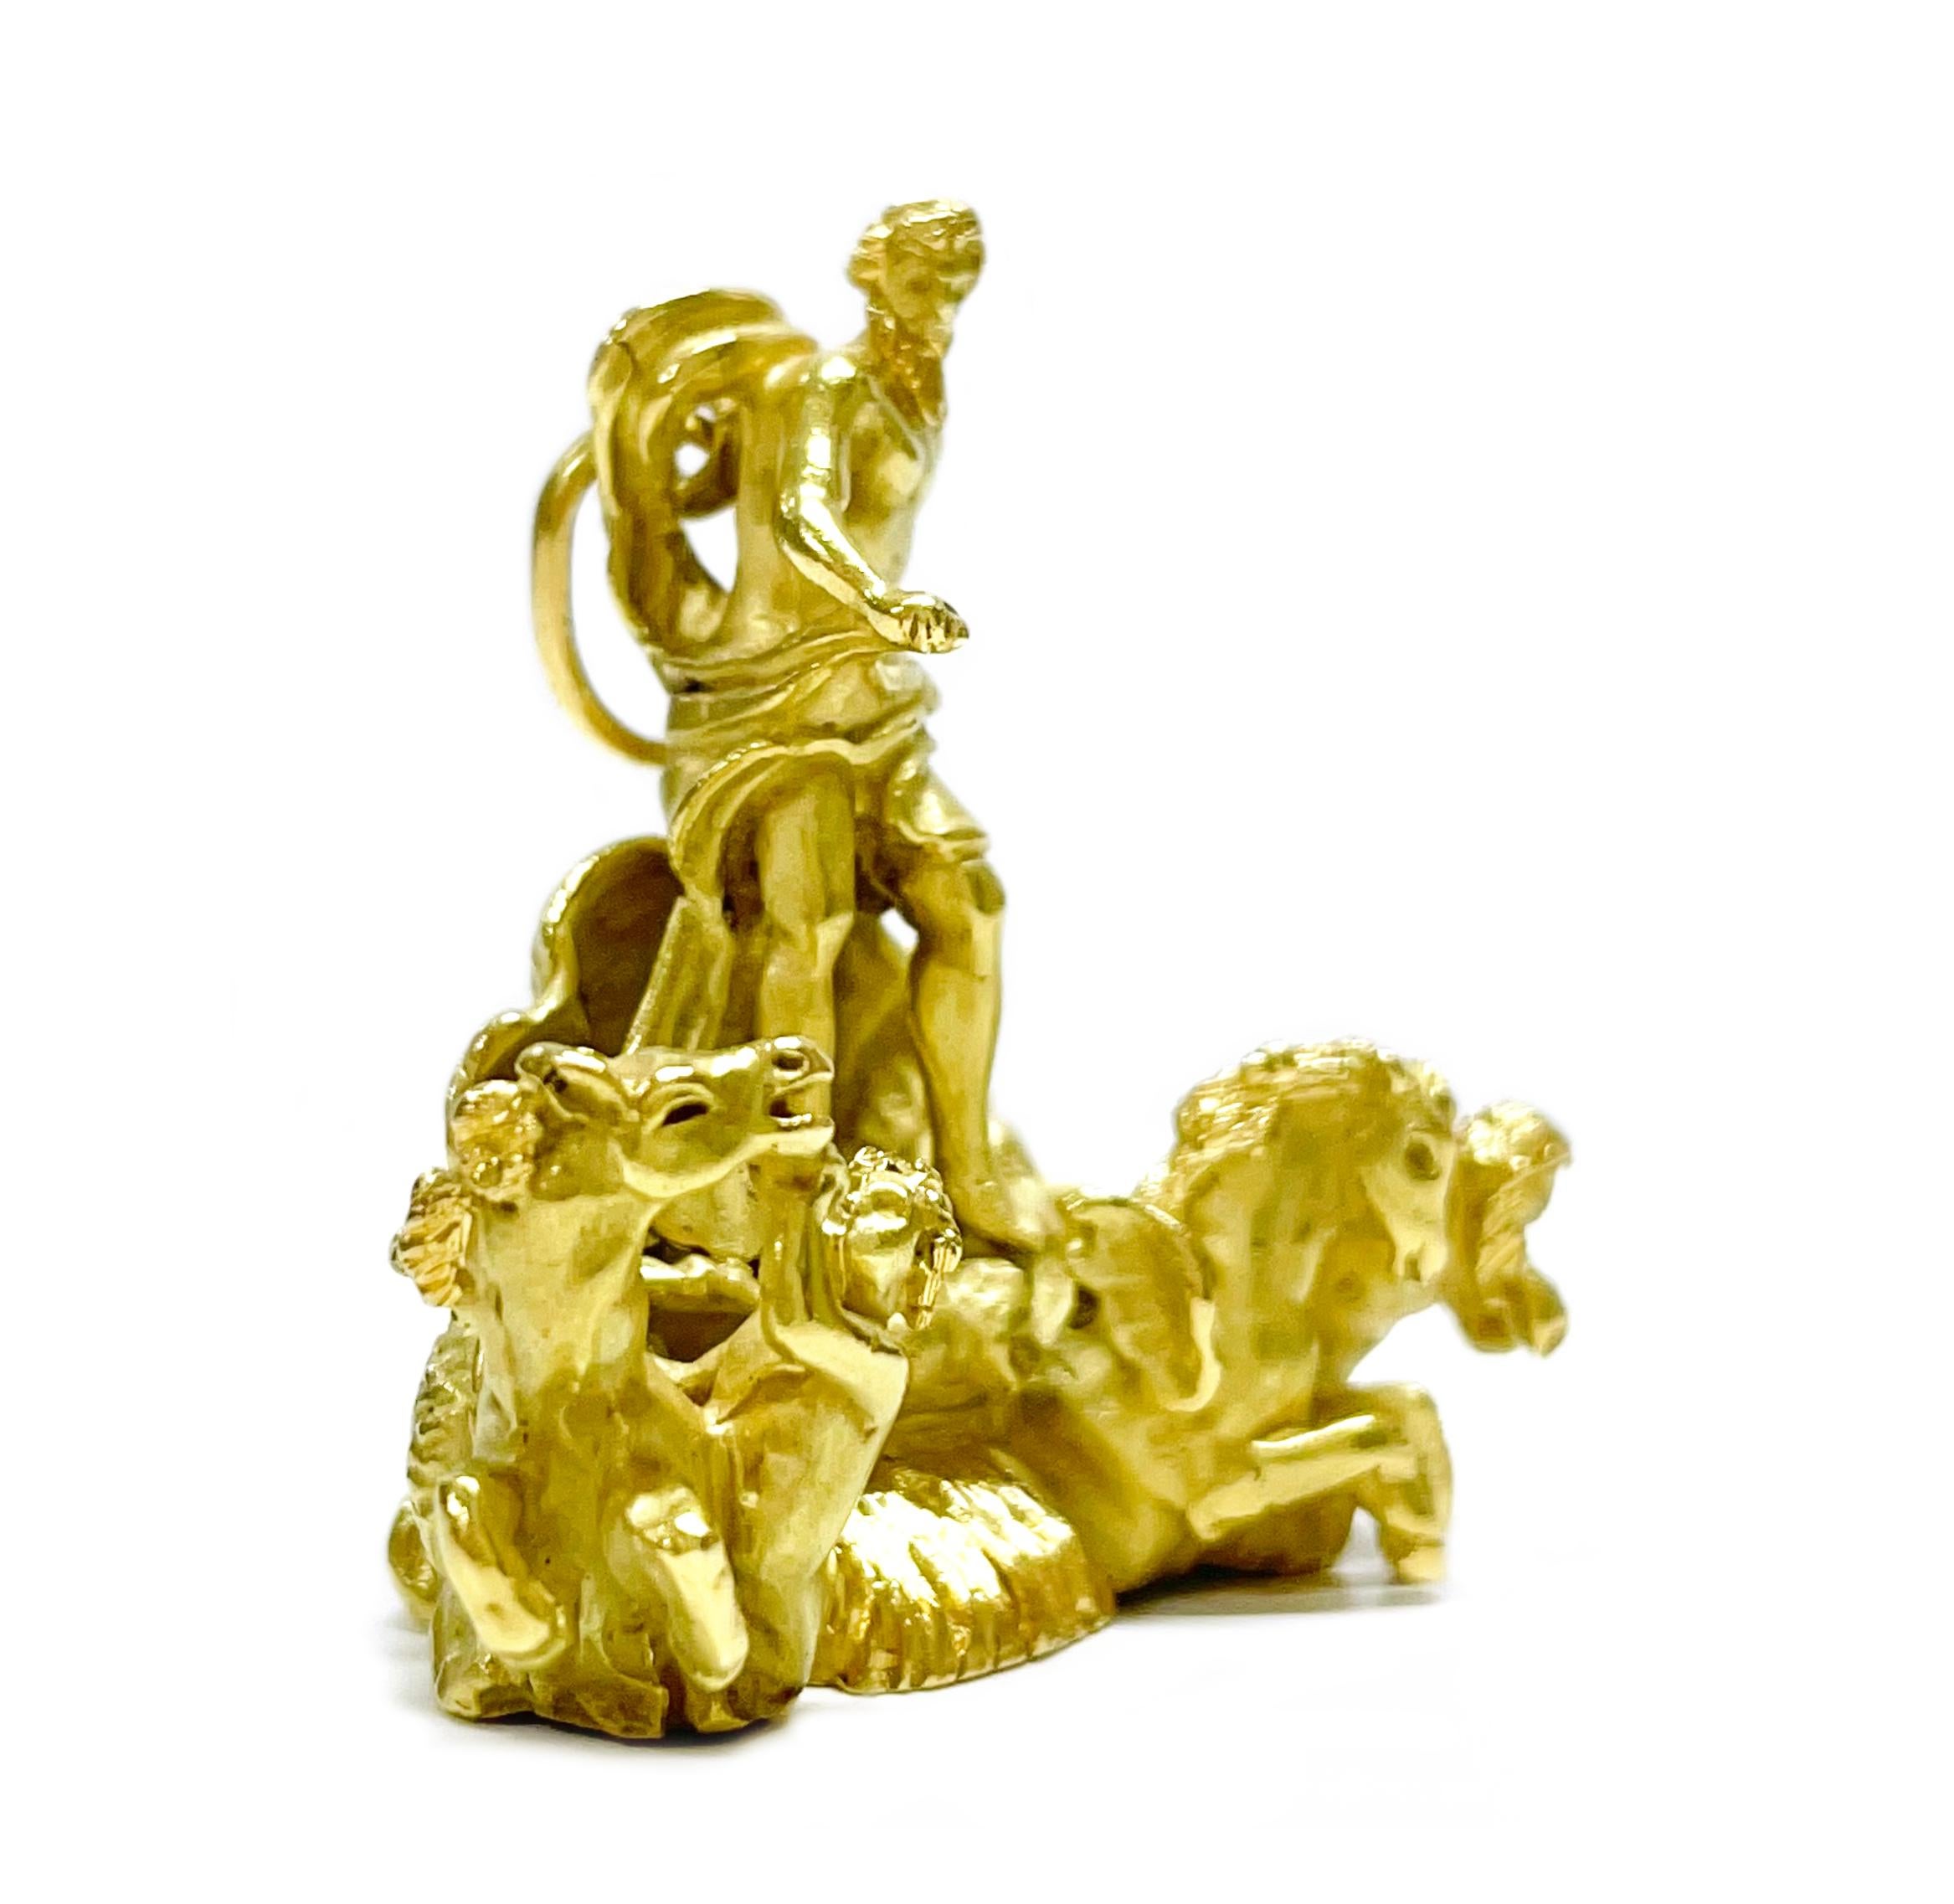 18 Karat Yellow Gold Italian Trevi Fountain Pendant. The pendant features Oceanus, the Greek Titan of the oceans, and a seahorse and triton at each side. The pendant measures 32 tall x 31mm wide. This pendant weighs 29.3 grams.

OKEANOS (Oceanus)